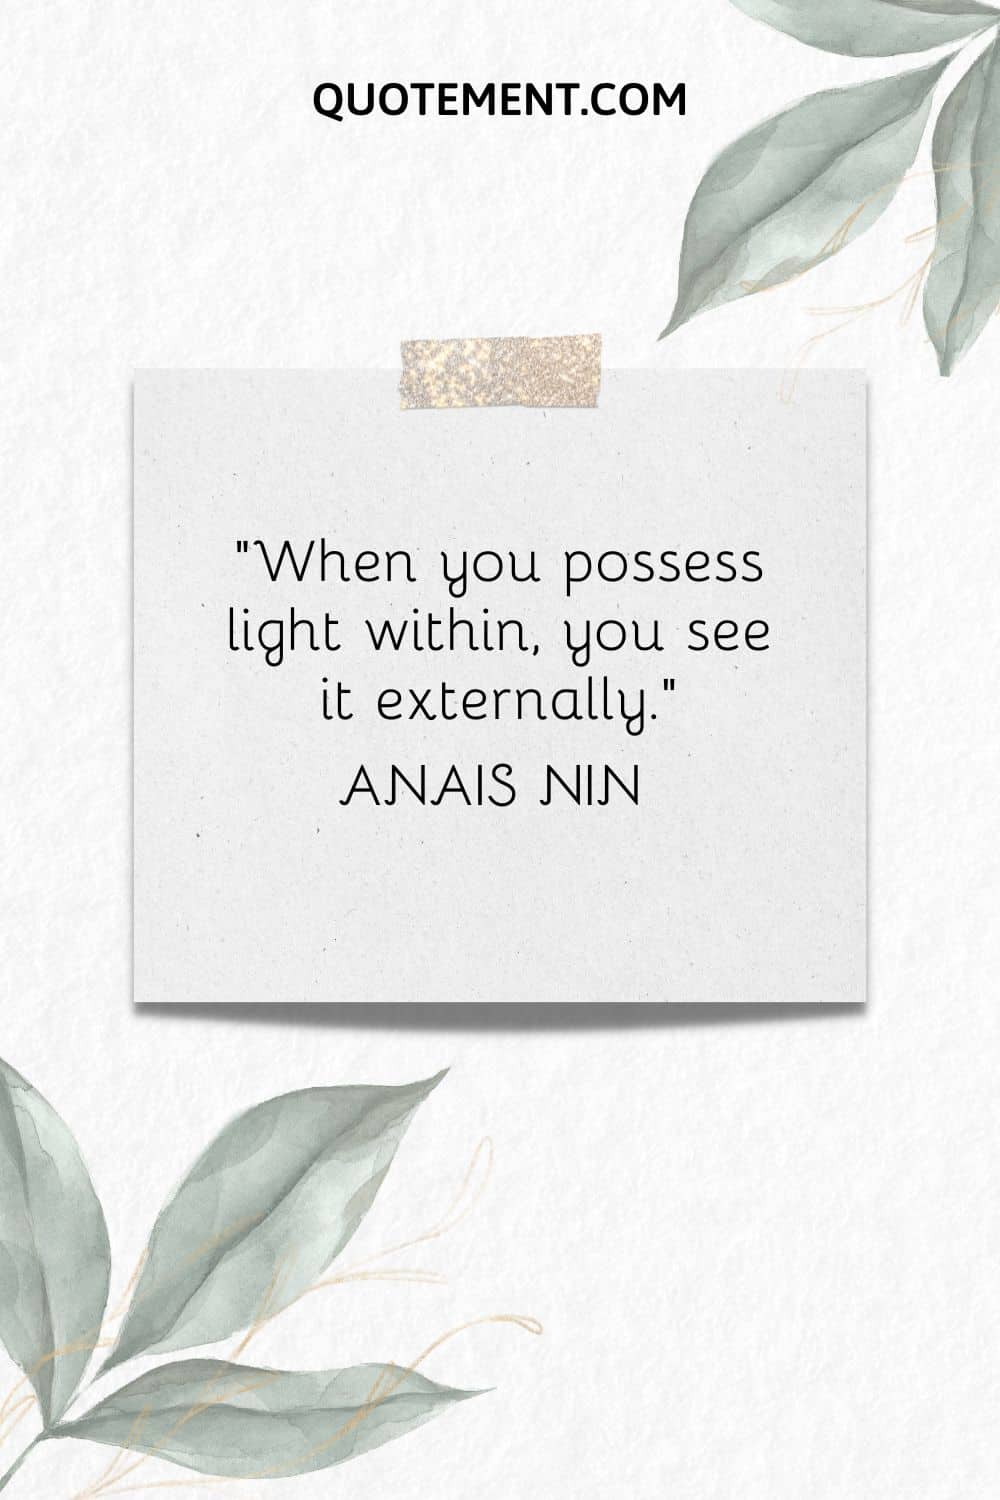 “When you possess light within, you see it externally.” — Anais Nin